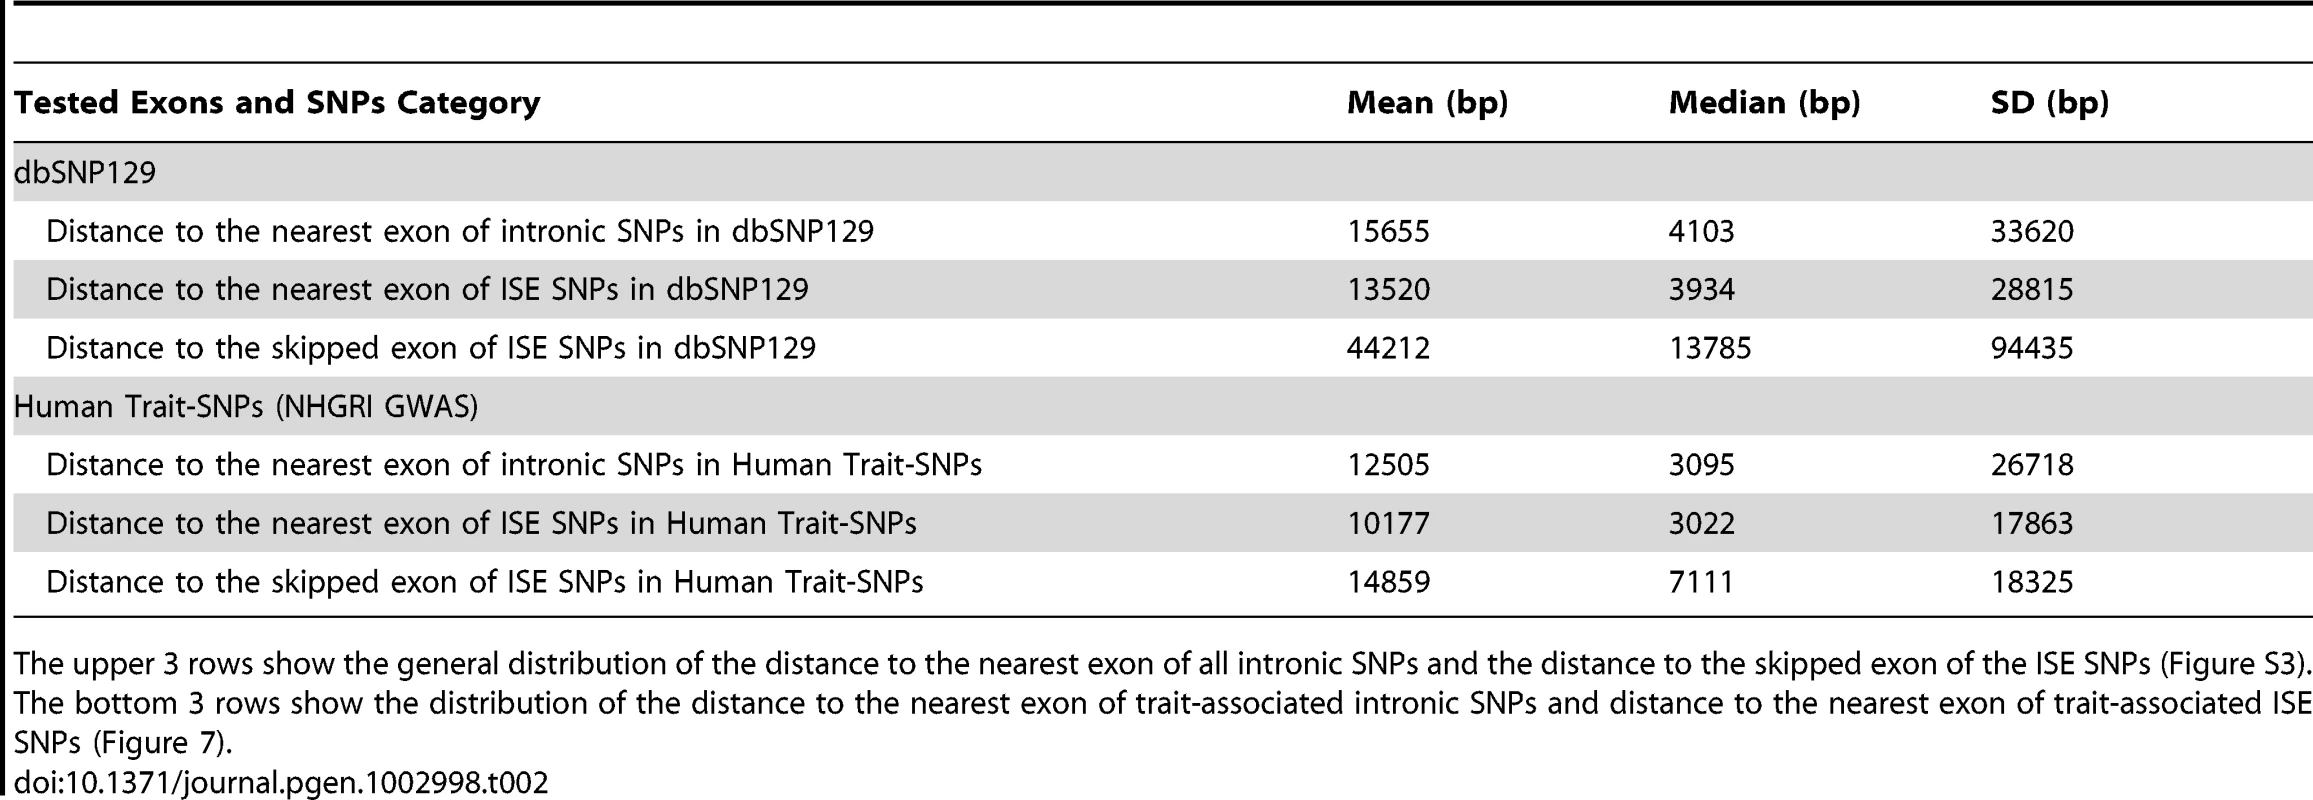 Distance to the Nearest Exon of Intronic SNPs Tends to Be Smaller Than the Distance to the Skipped Exon of ISE SNPs.